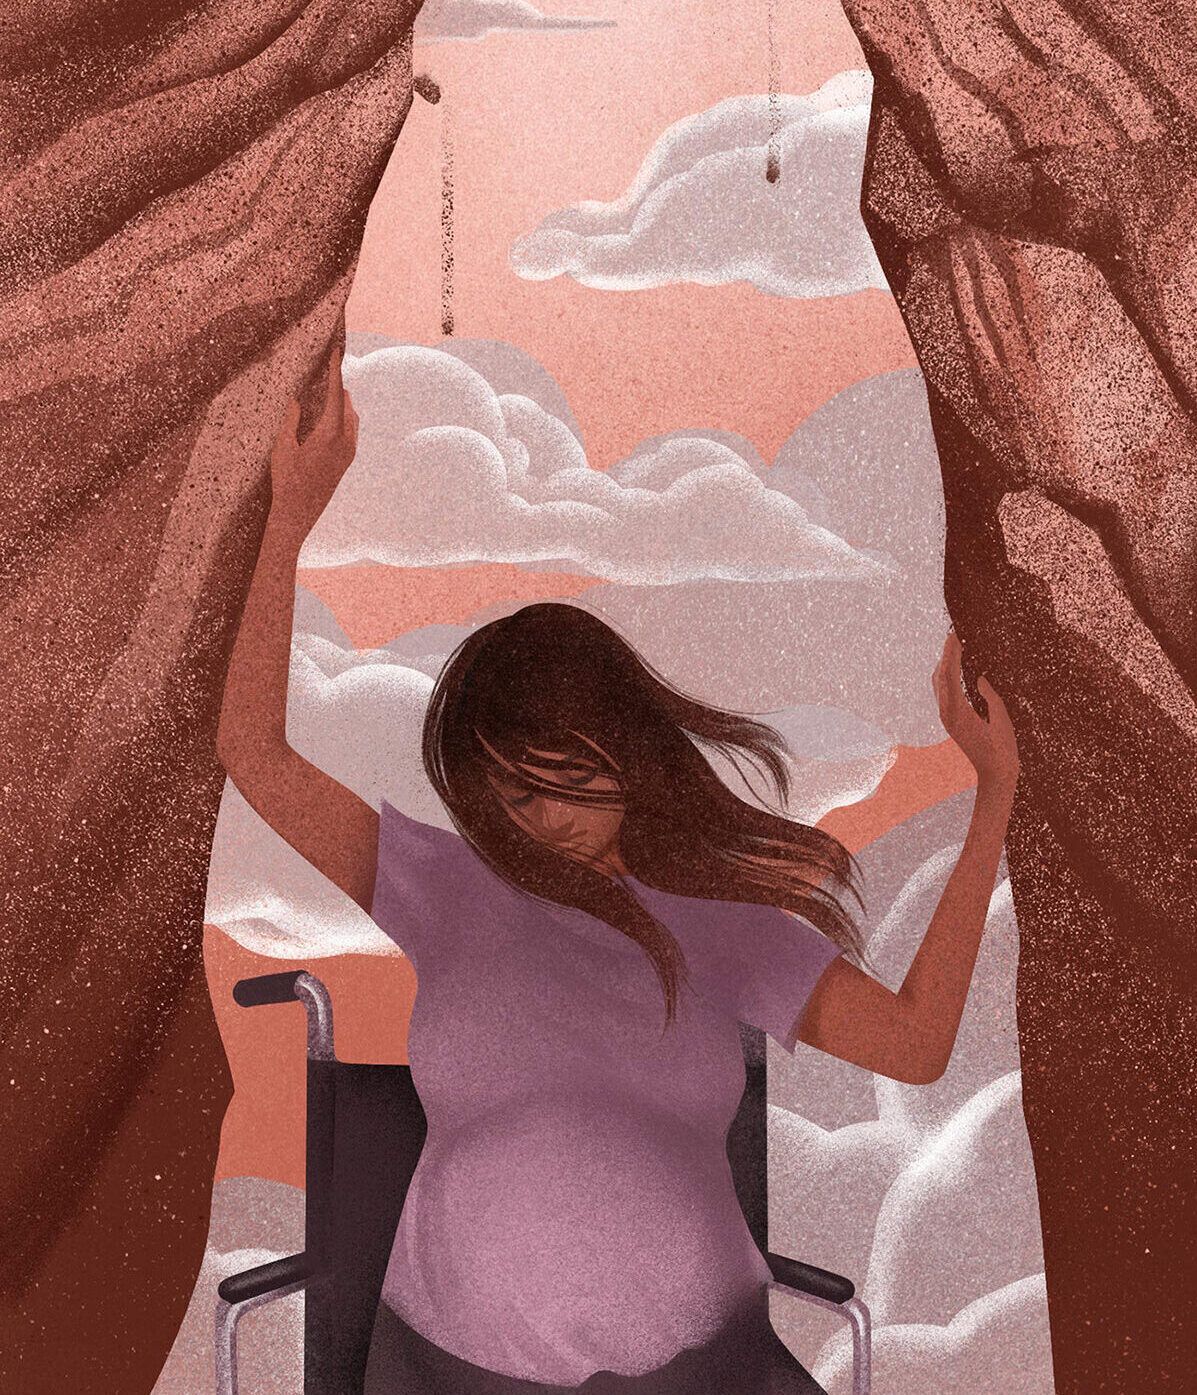 Digital illustration of a pregnant woman in a wheel chair, with her hands up and against two rock cliffs on either side of her.